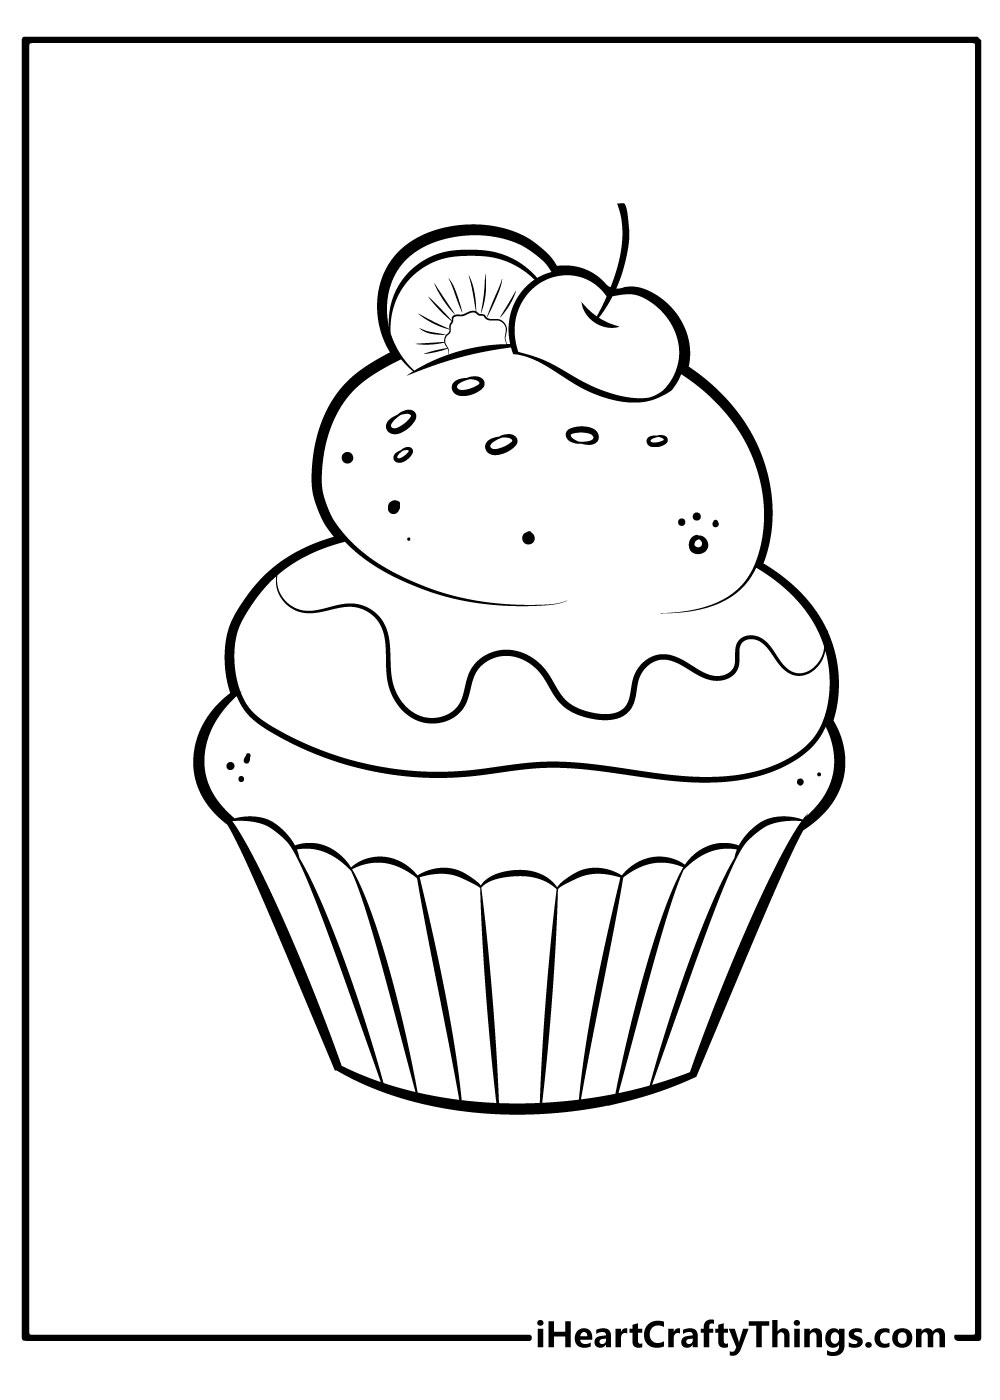 Cupcake coloring pages free printables